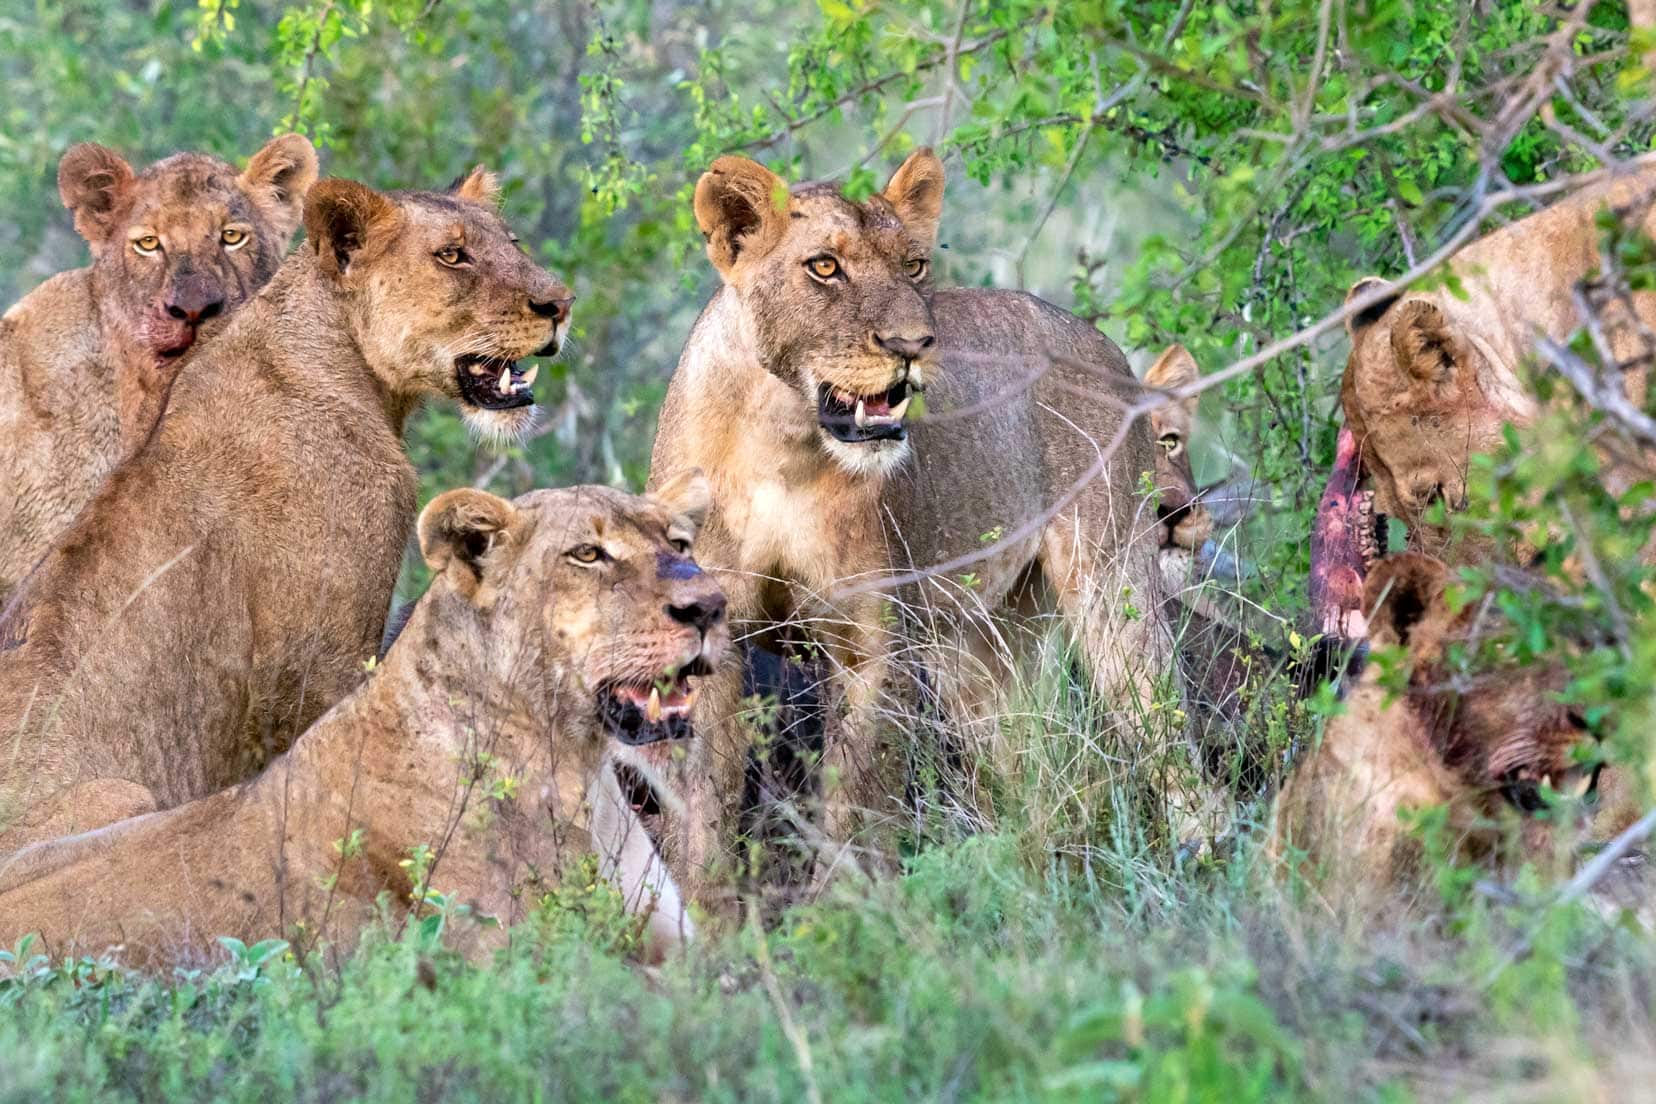 Lionesses form a tight family pack around the buffalo carcass